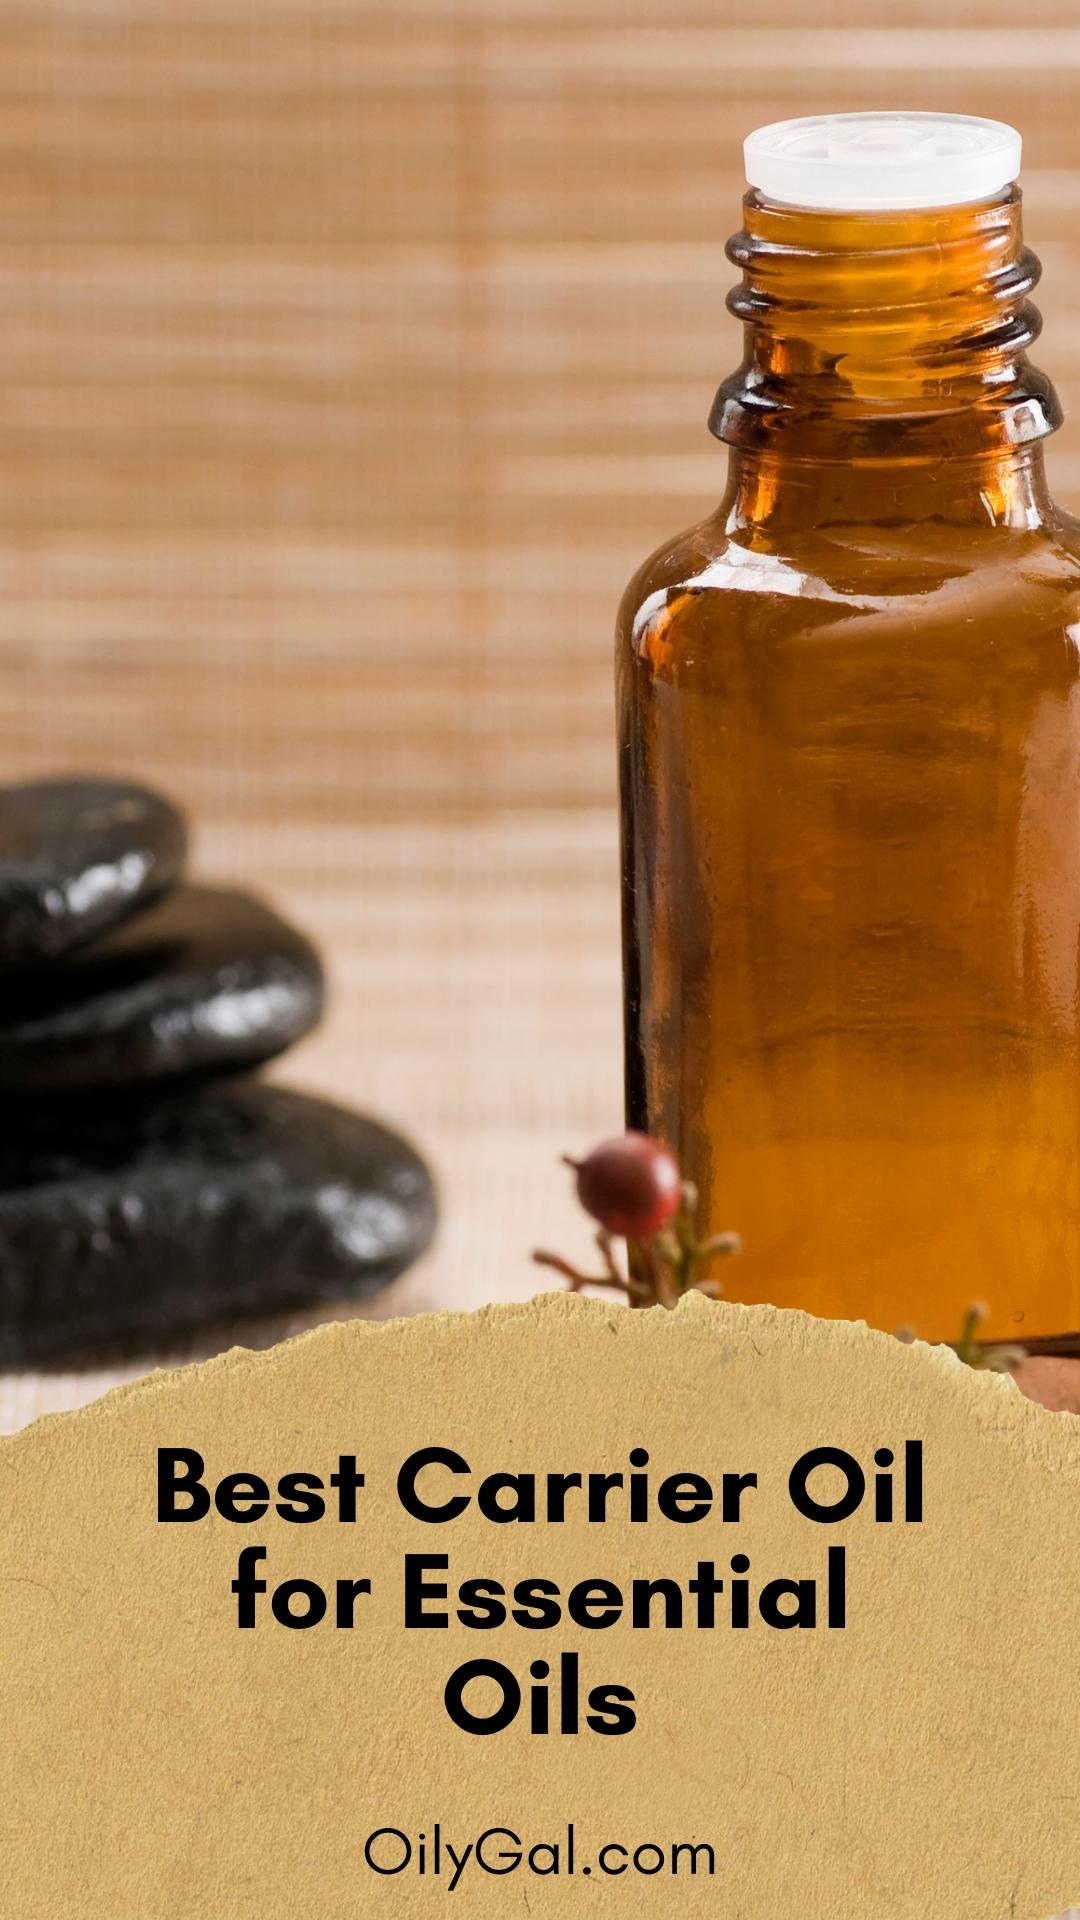 Best Carrier Oil for Essential Oils